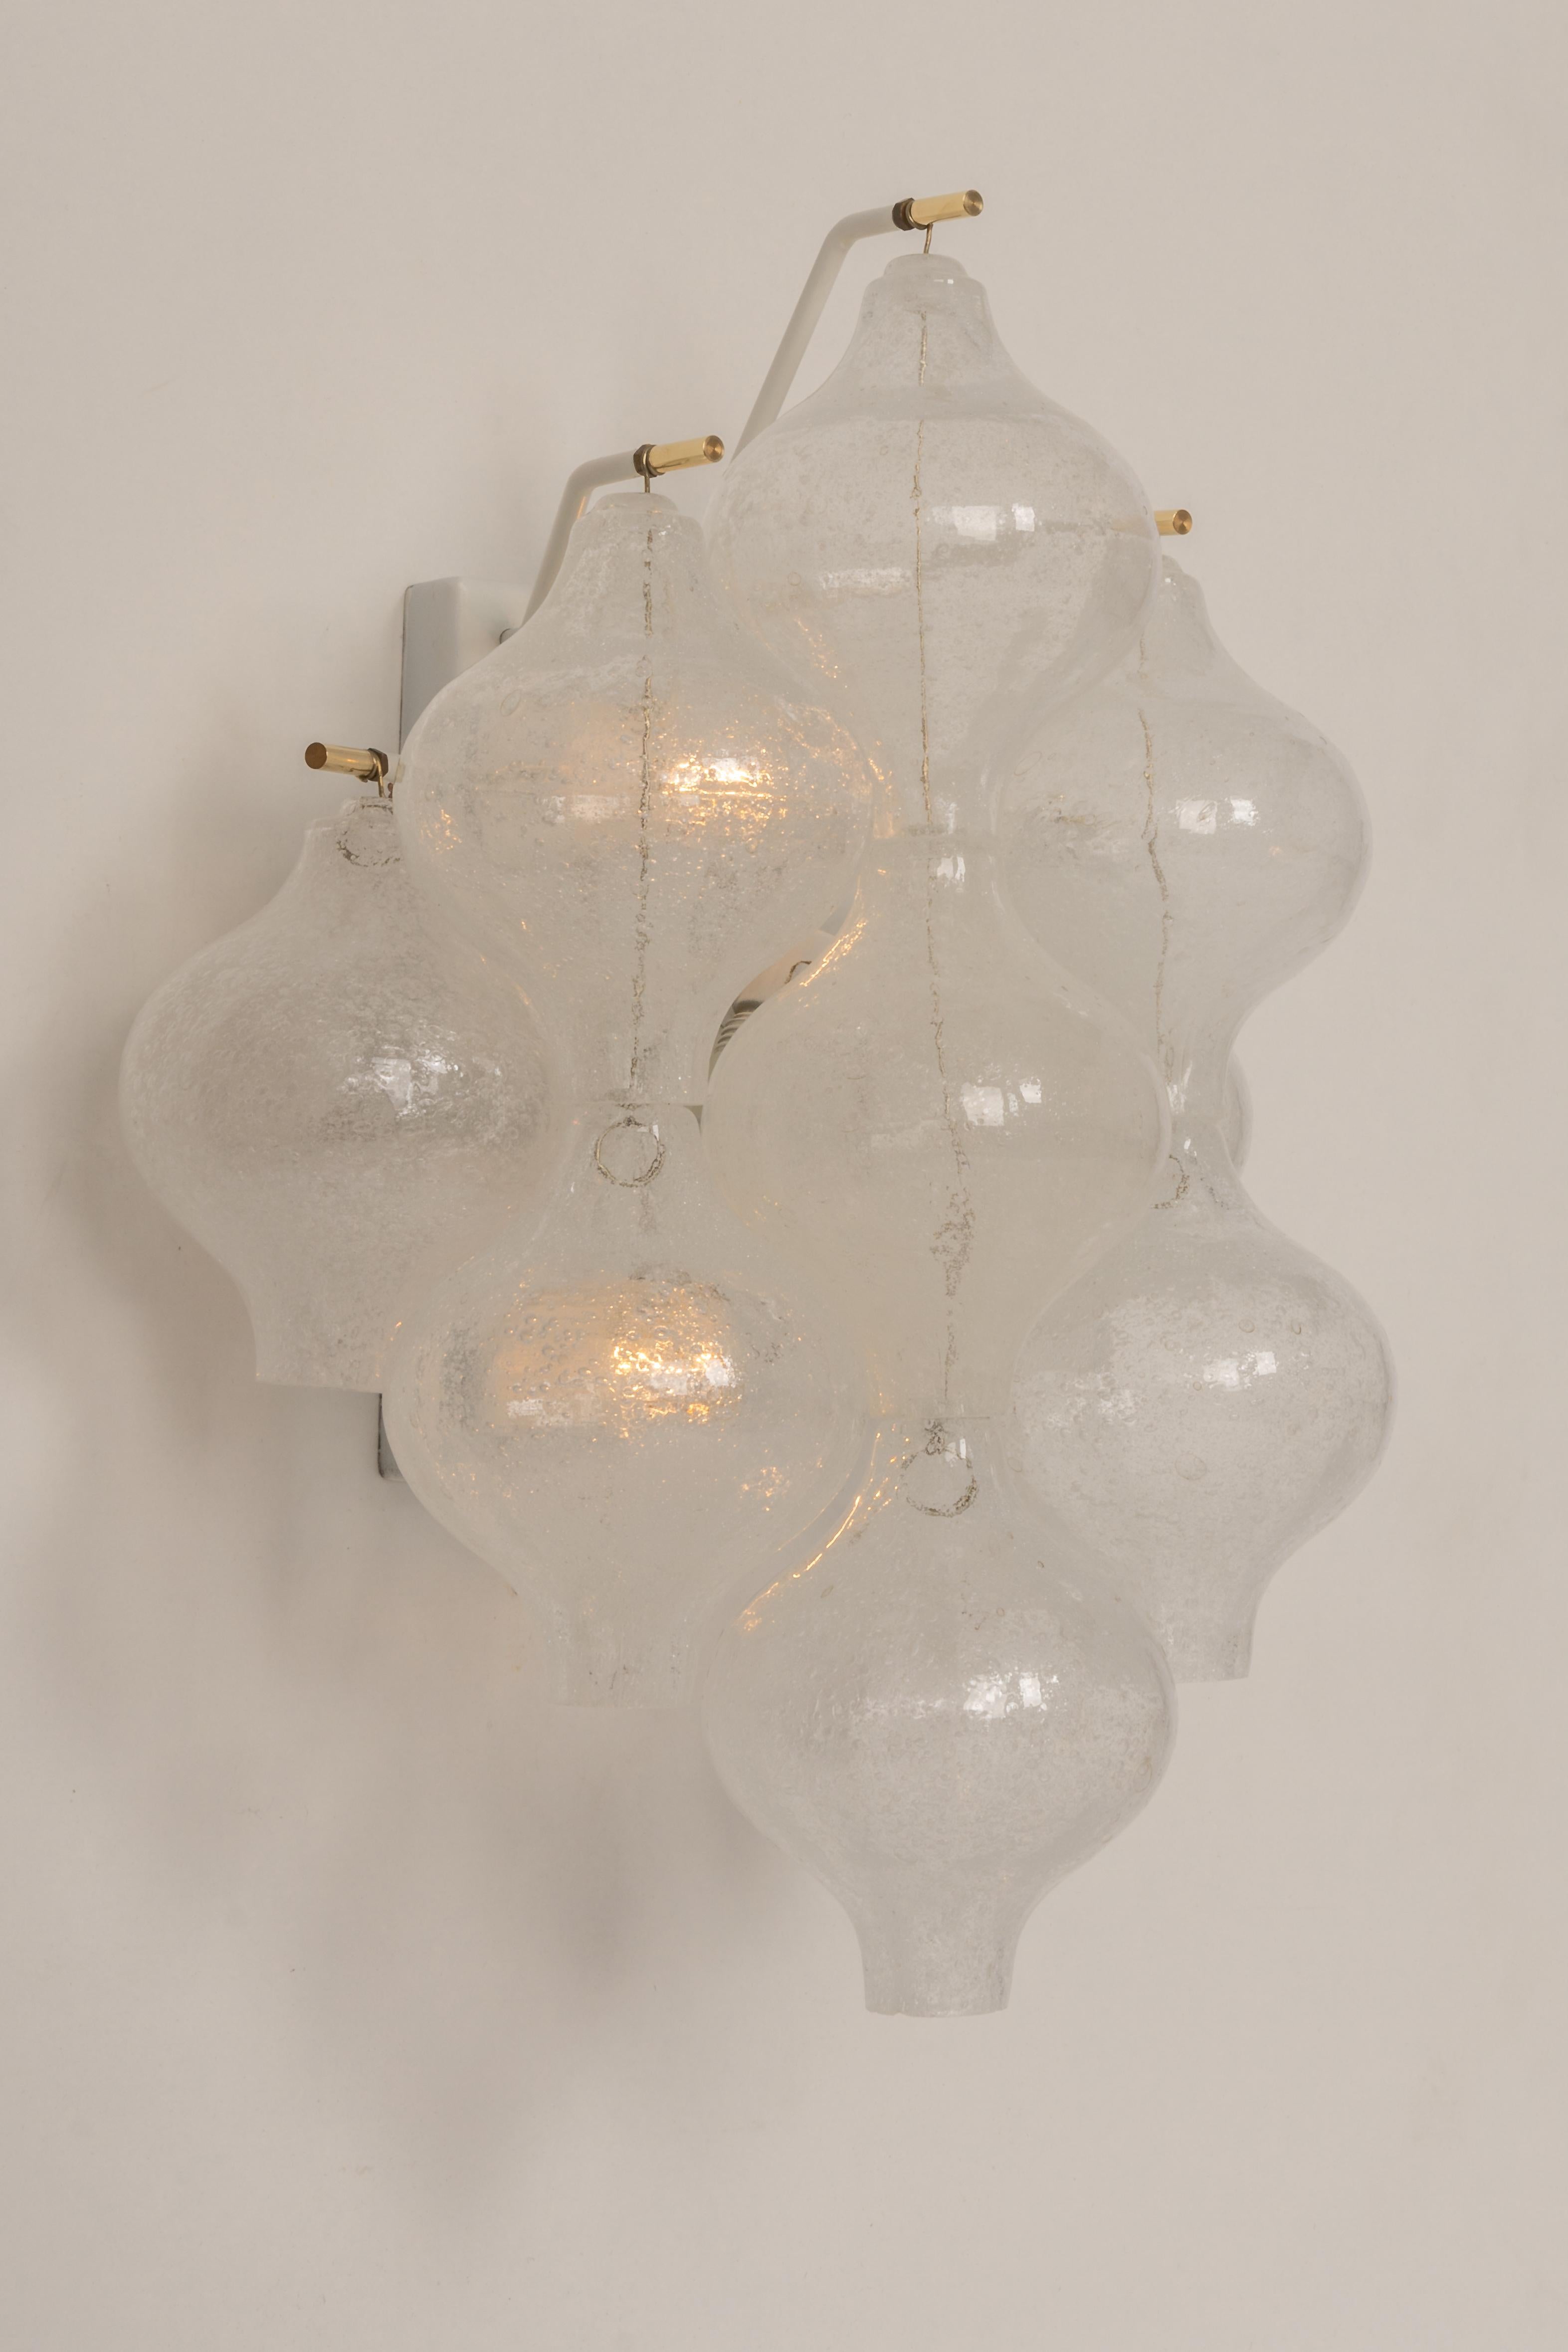 Murano Glass 1 of 3 Pairs of Kalmar 'Tulipan' Sconces Wall Lights, Austria, 1970s For Sale